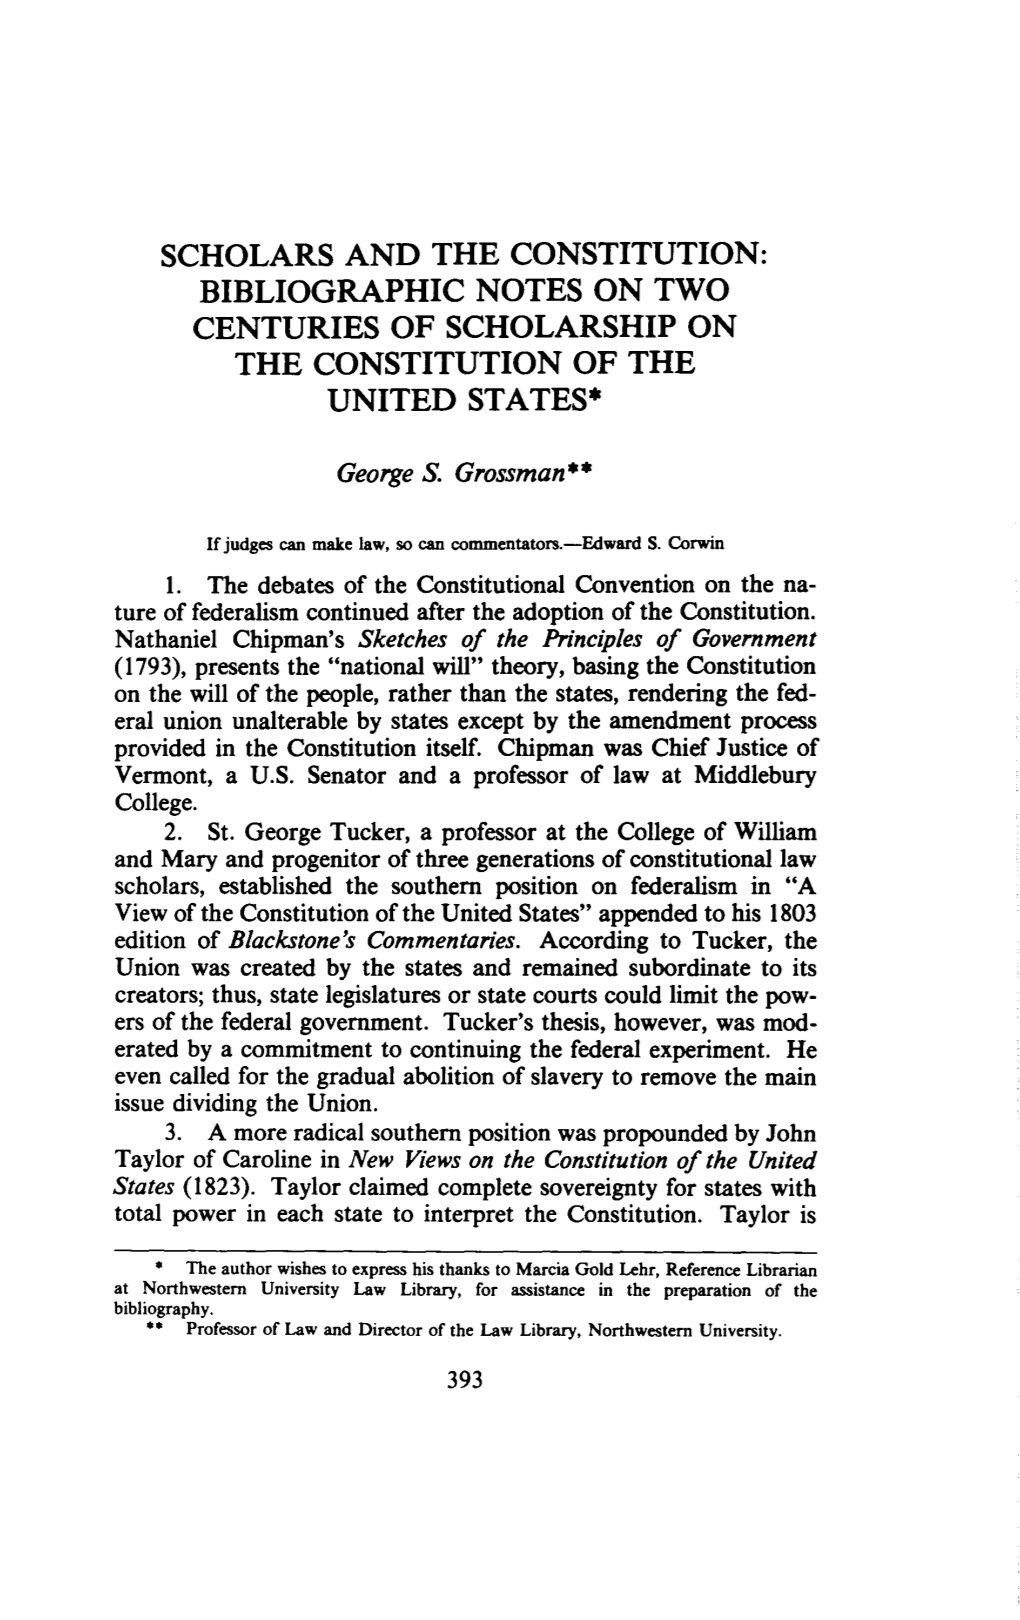 Scholars and the Constitution: Bibliographic Notes on Two Centuries of Scholarship on the Constitution of the United States*